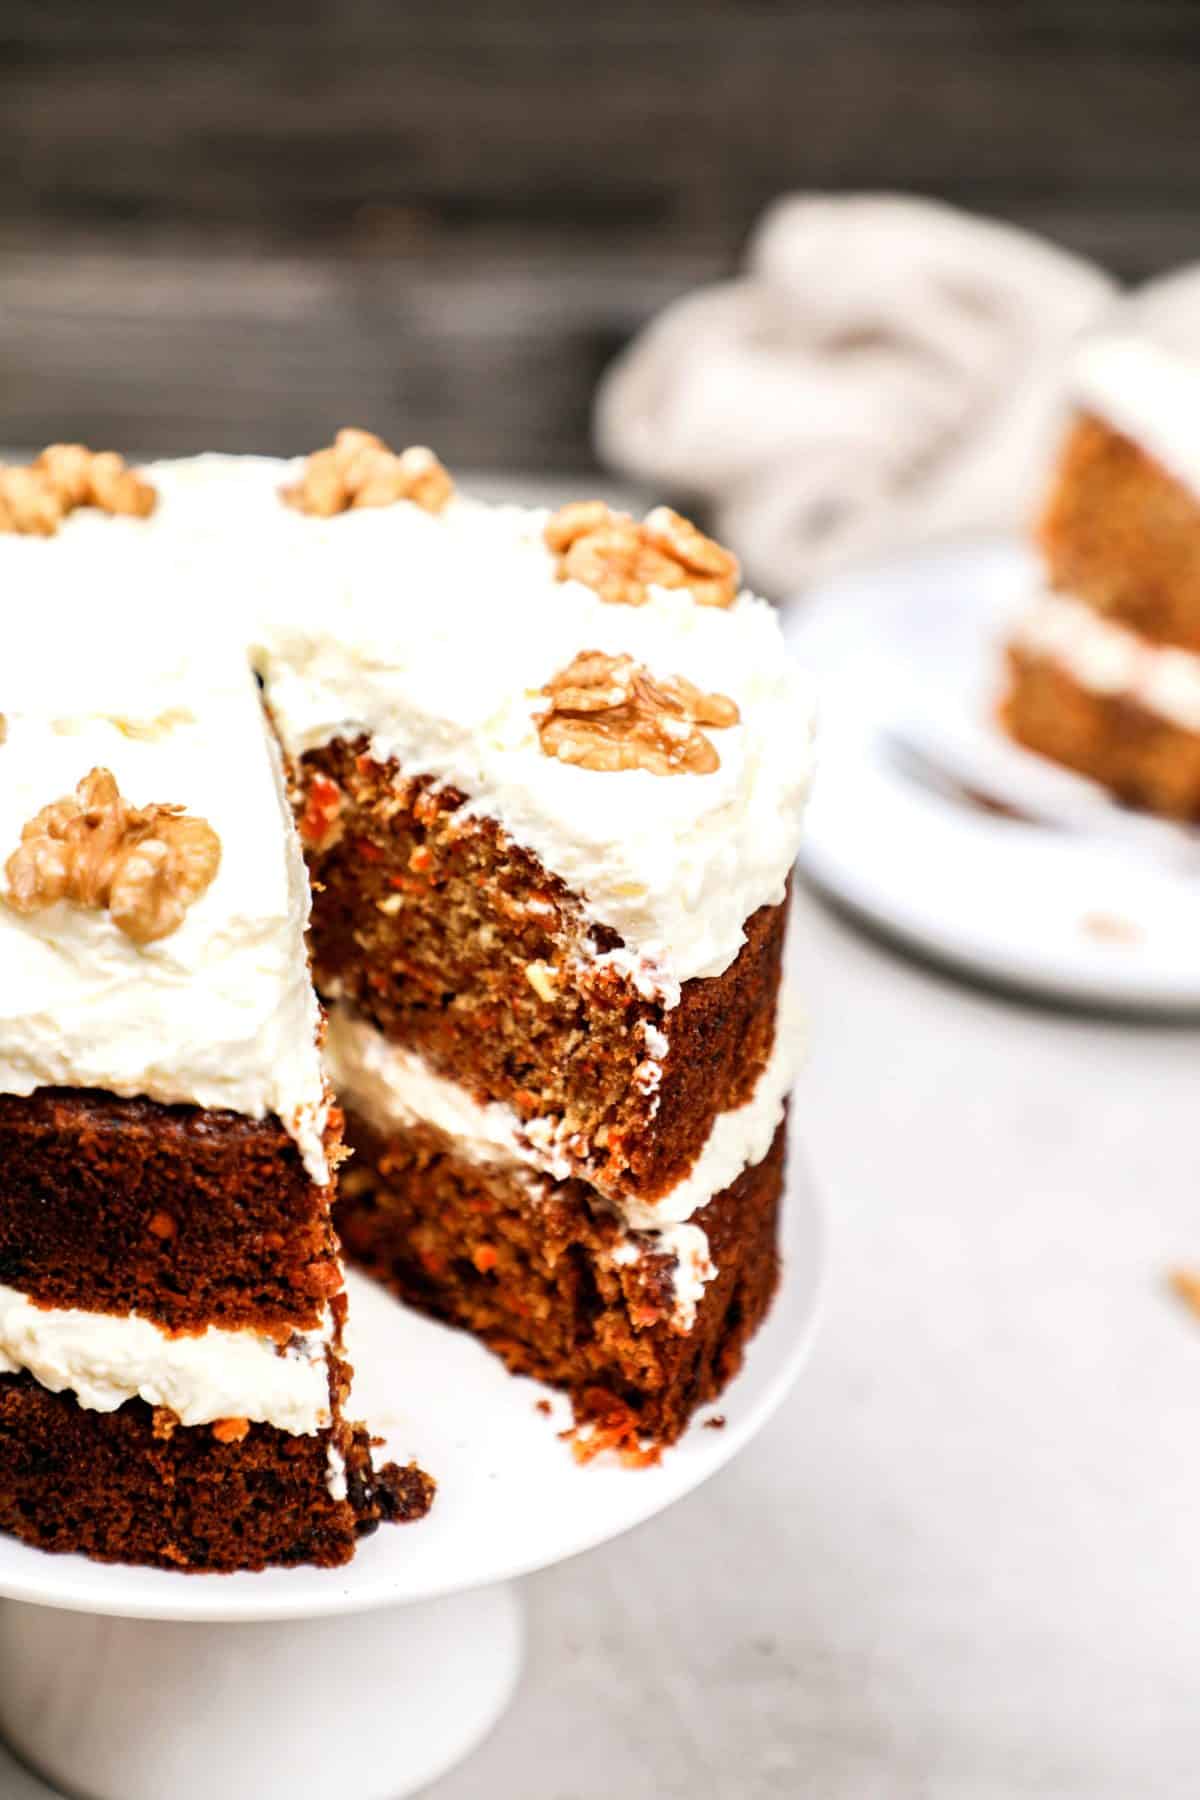 A carrot cake with a slice cut out showing the inside.